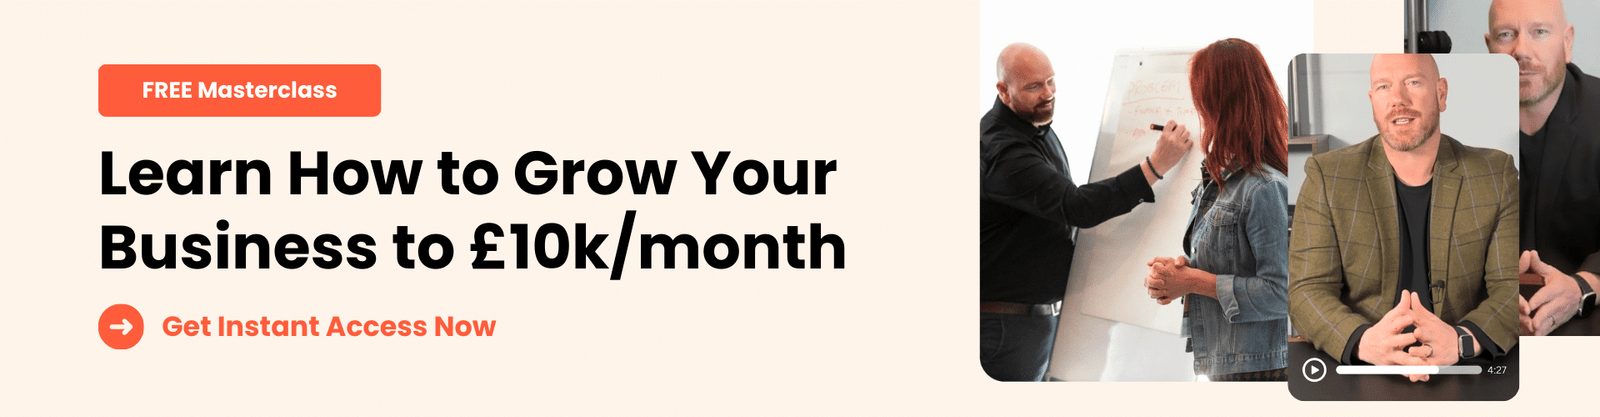 FREE: Learn How to Grow Your Business to £10k/month